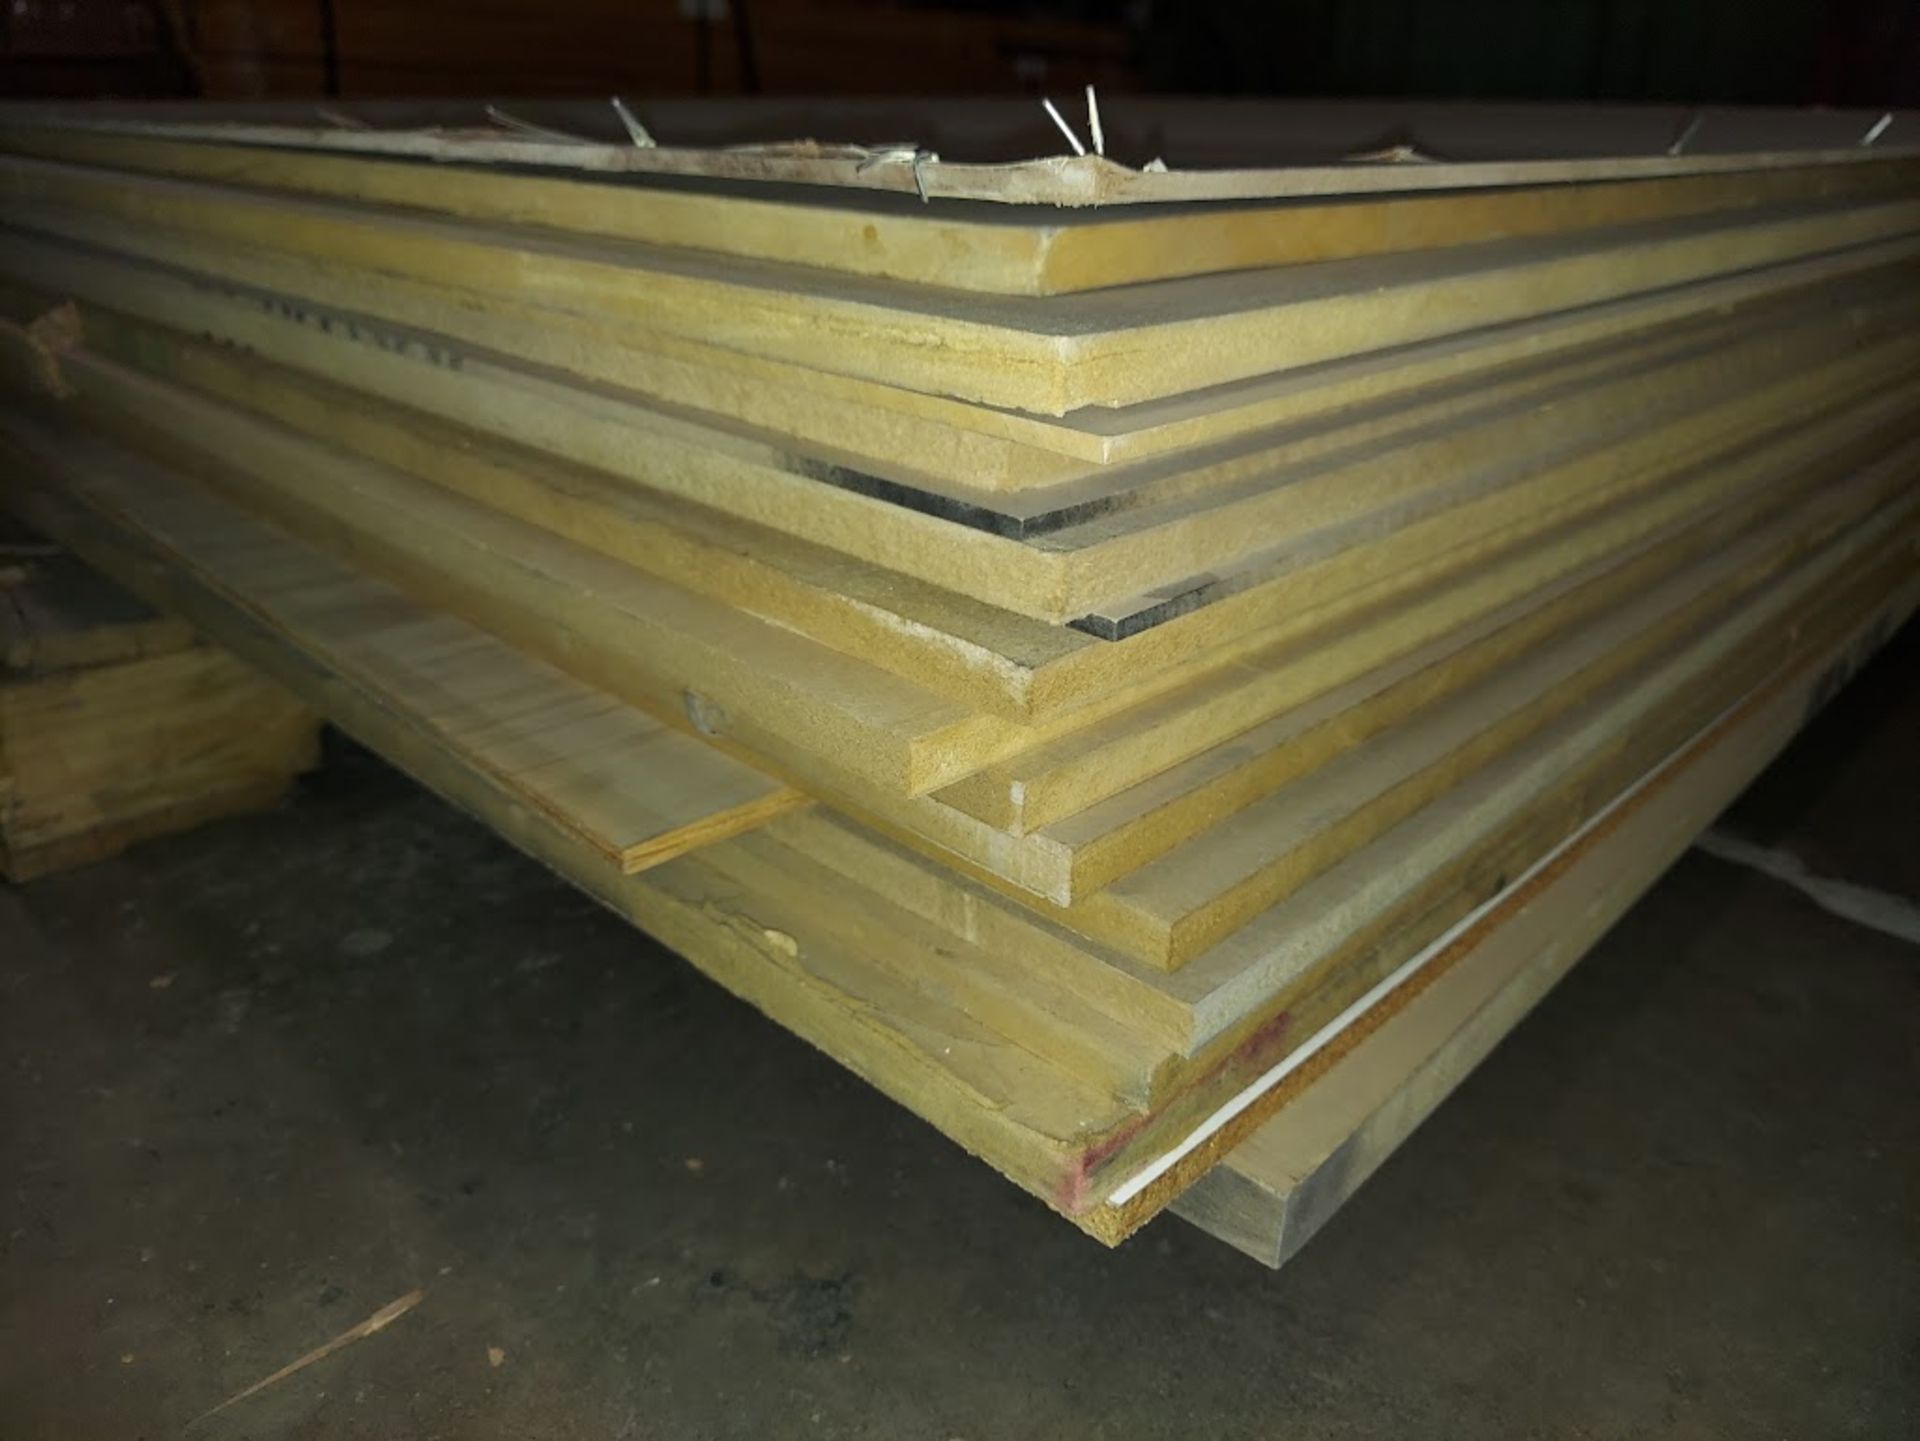 Lot of Misc. MDF, PBC, Plywood 4'x8' Sheets, 1/8", 1/4", 1/2", 3/4" - Image 2 of 2